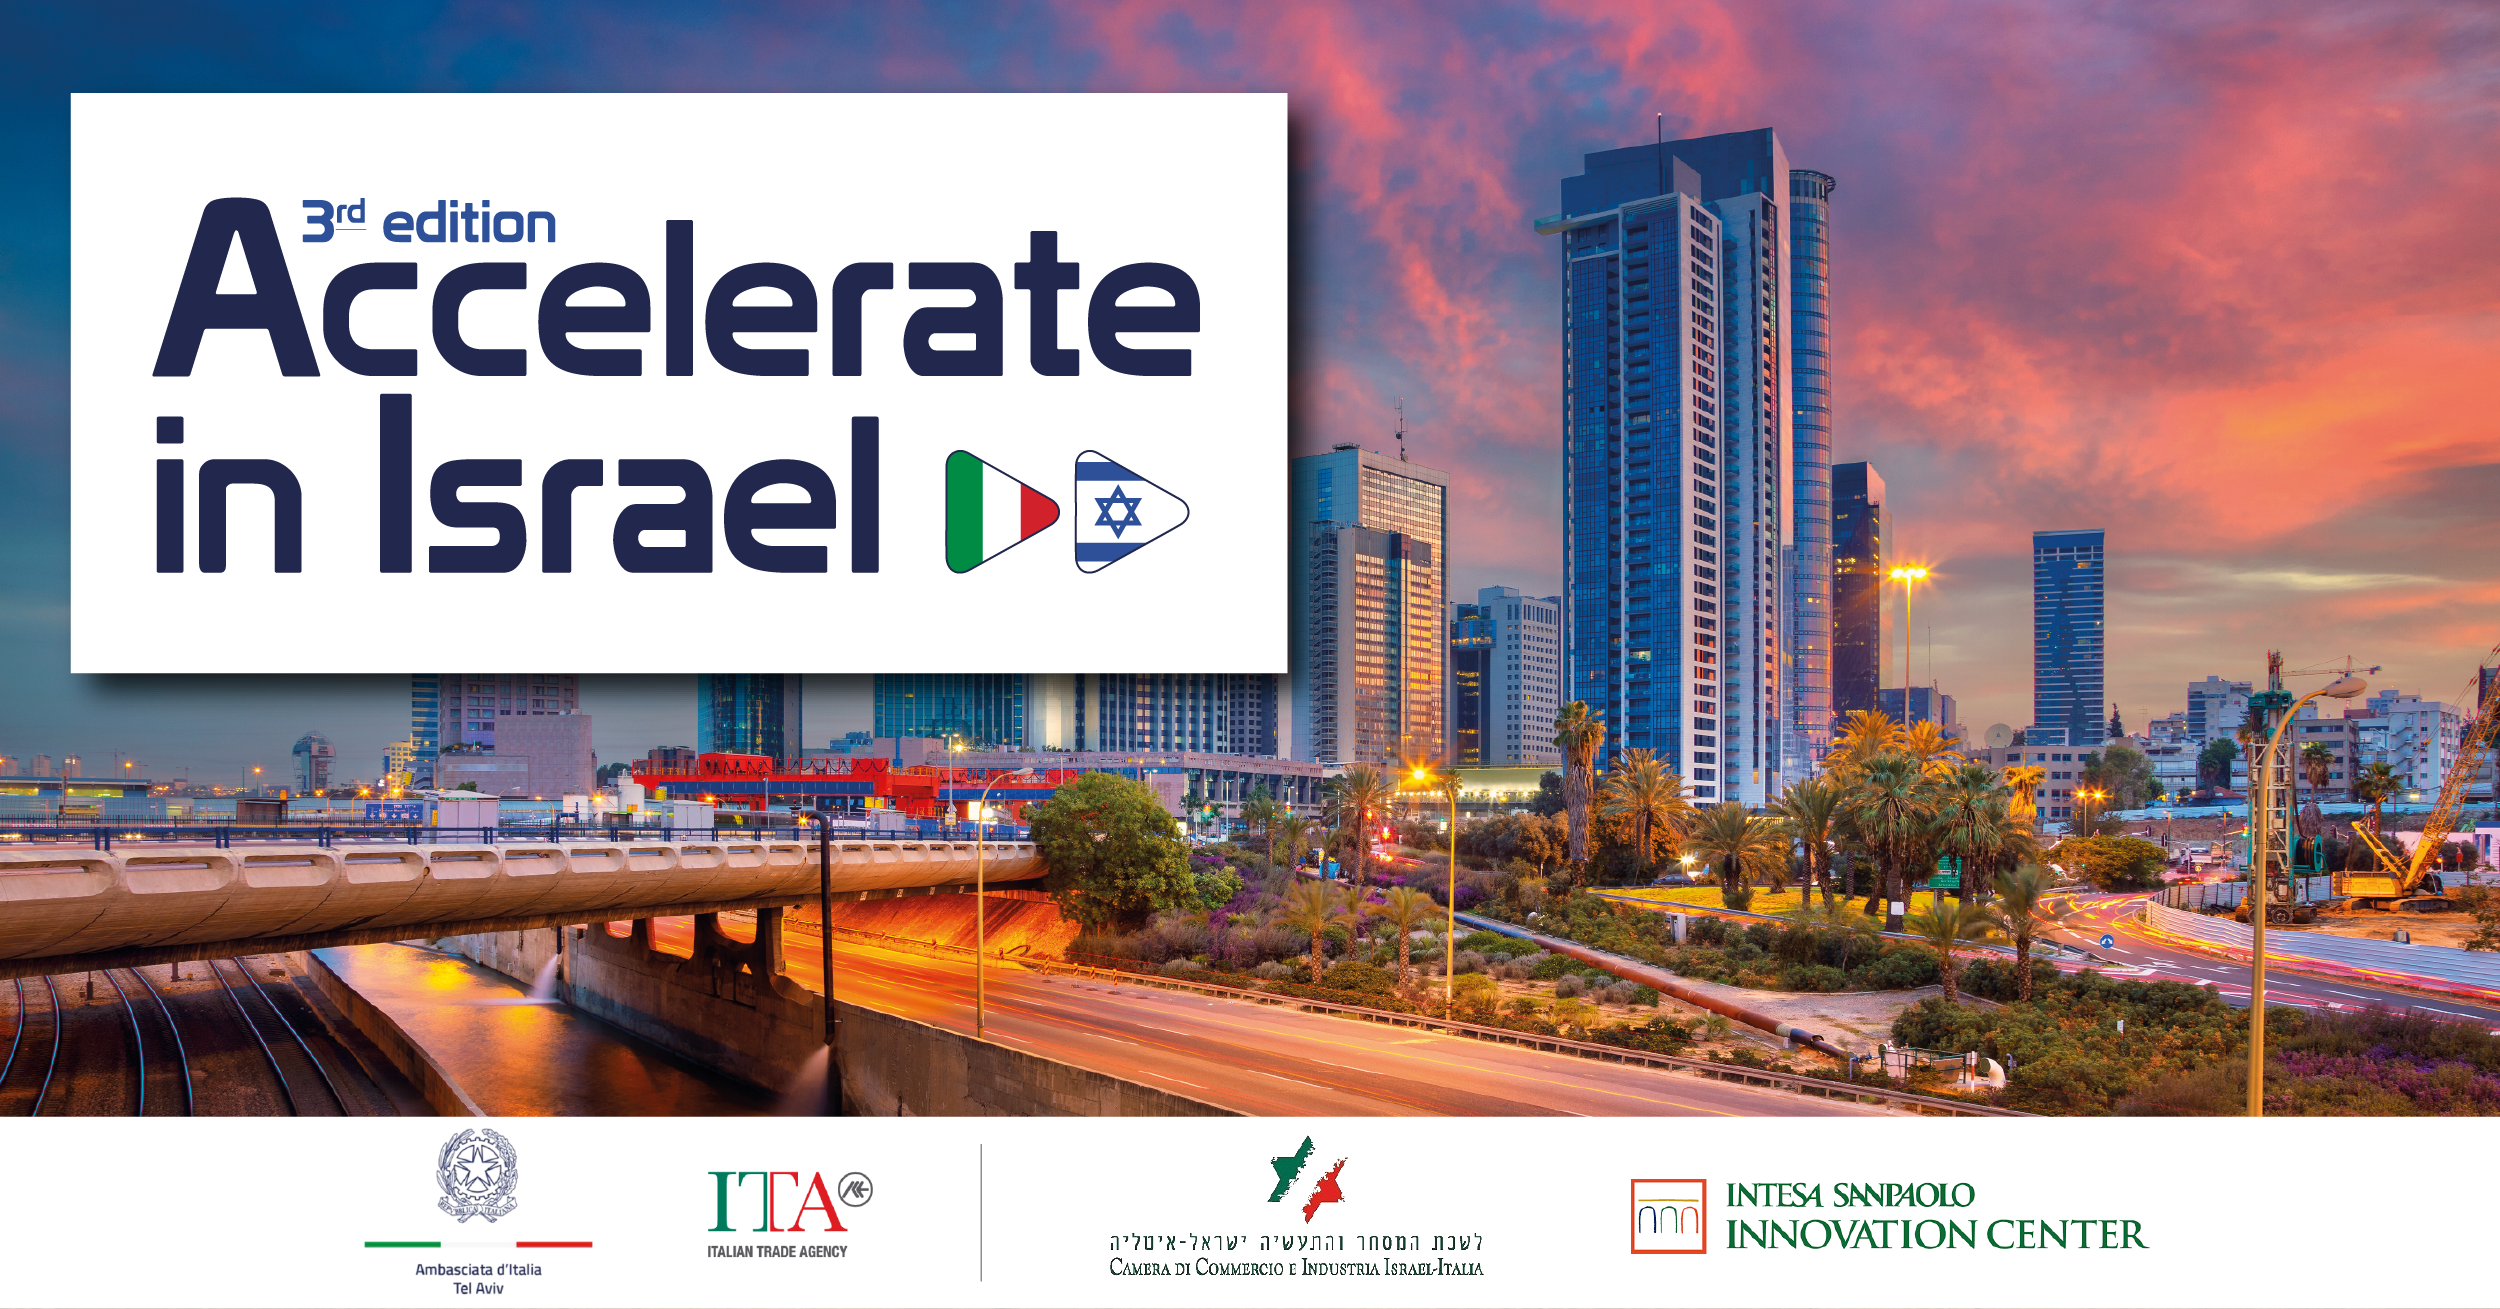 Accelerate in Israel - 3rd